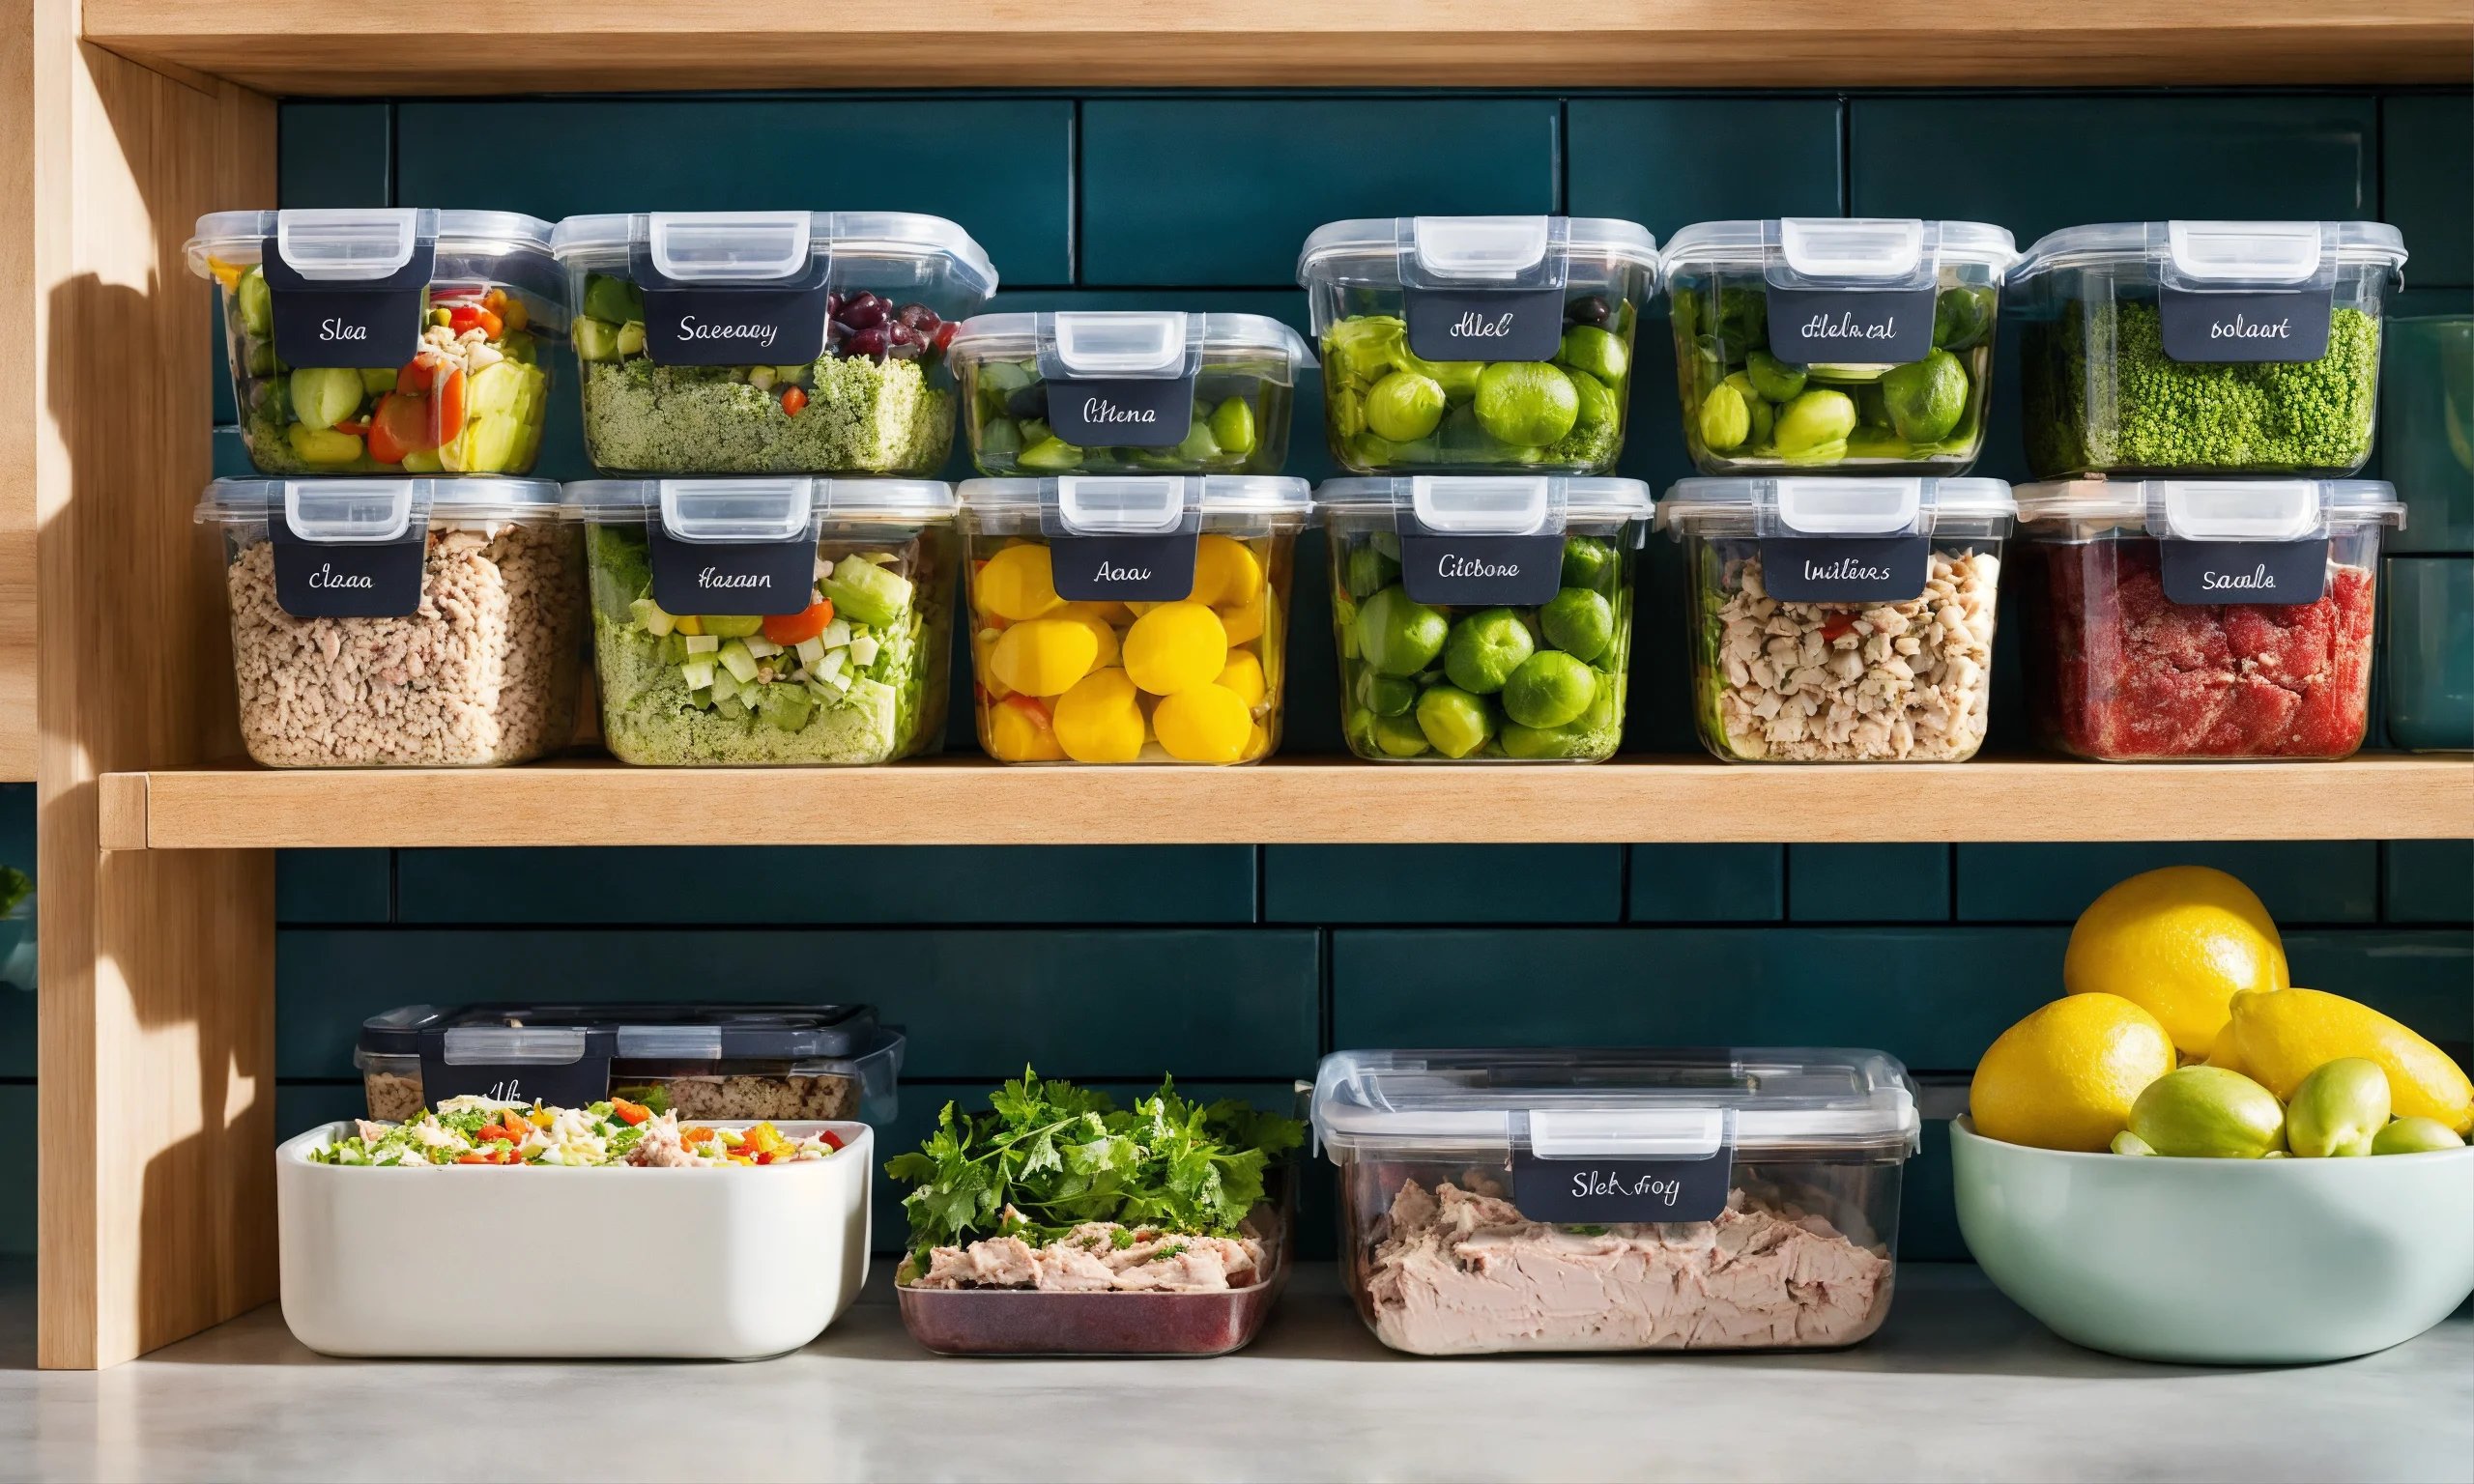 A set of different types of food storage containers (glass and plastic) on a kitchen shelf. Each container has a label indicating it’s for tuna salad, showing organization and proper storage.